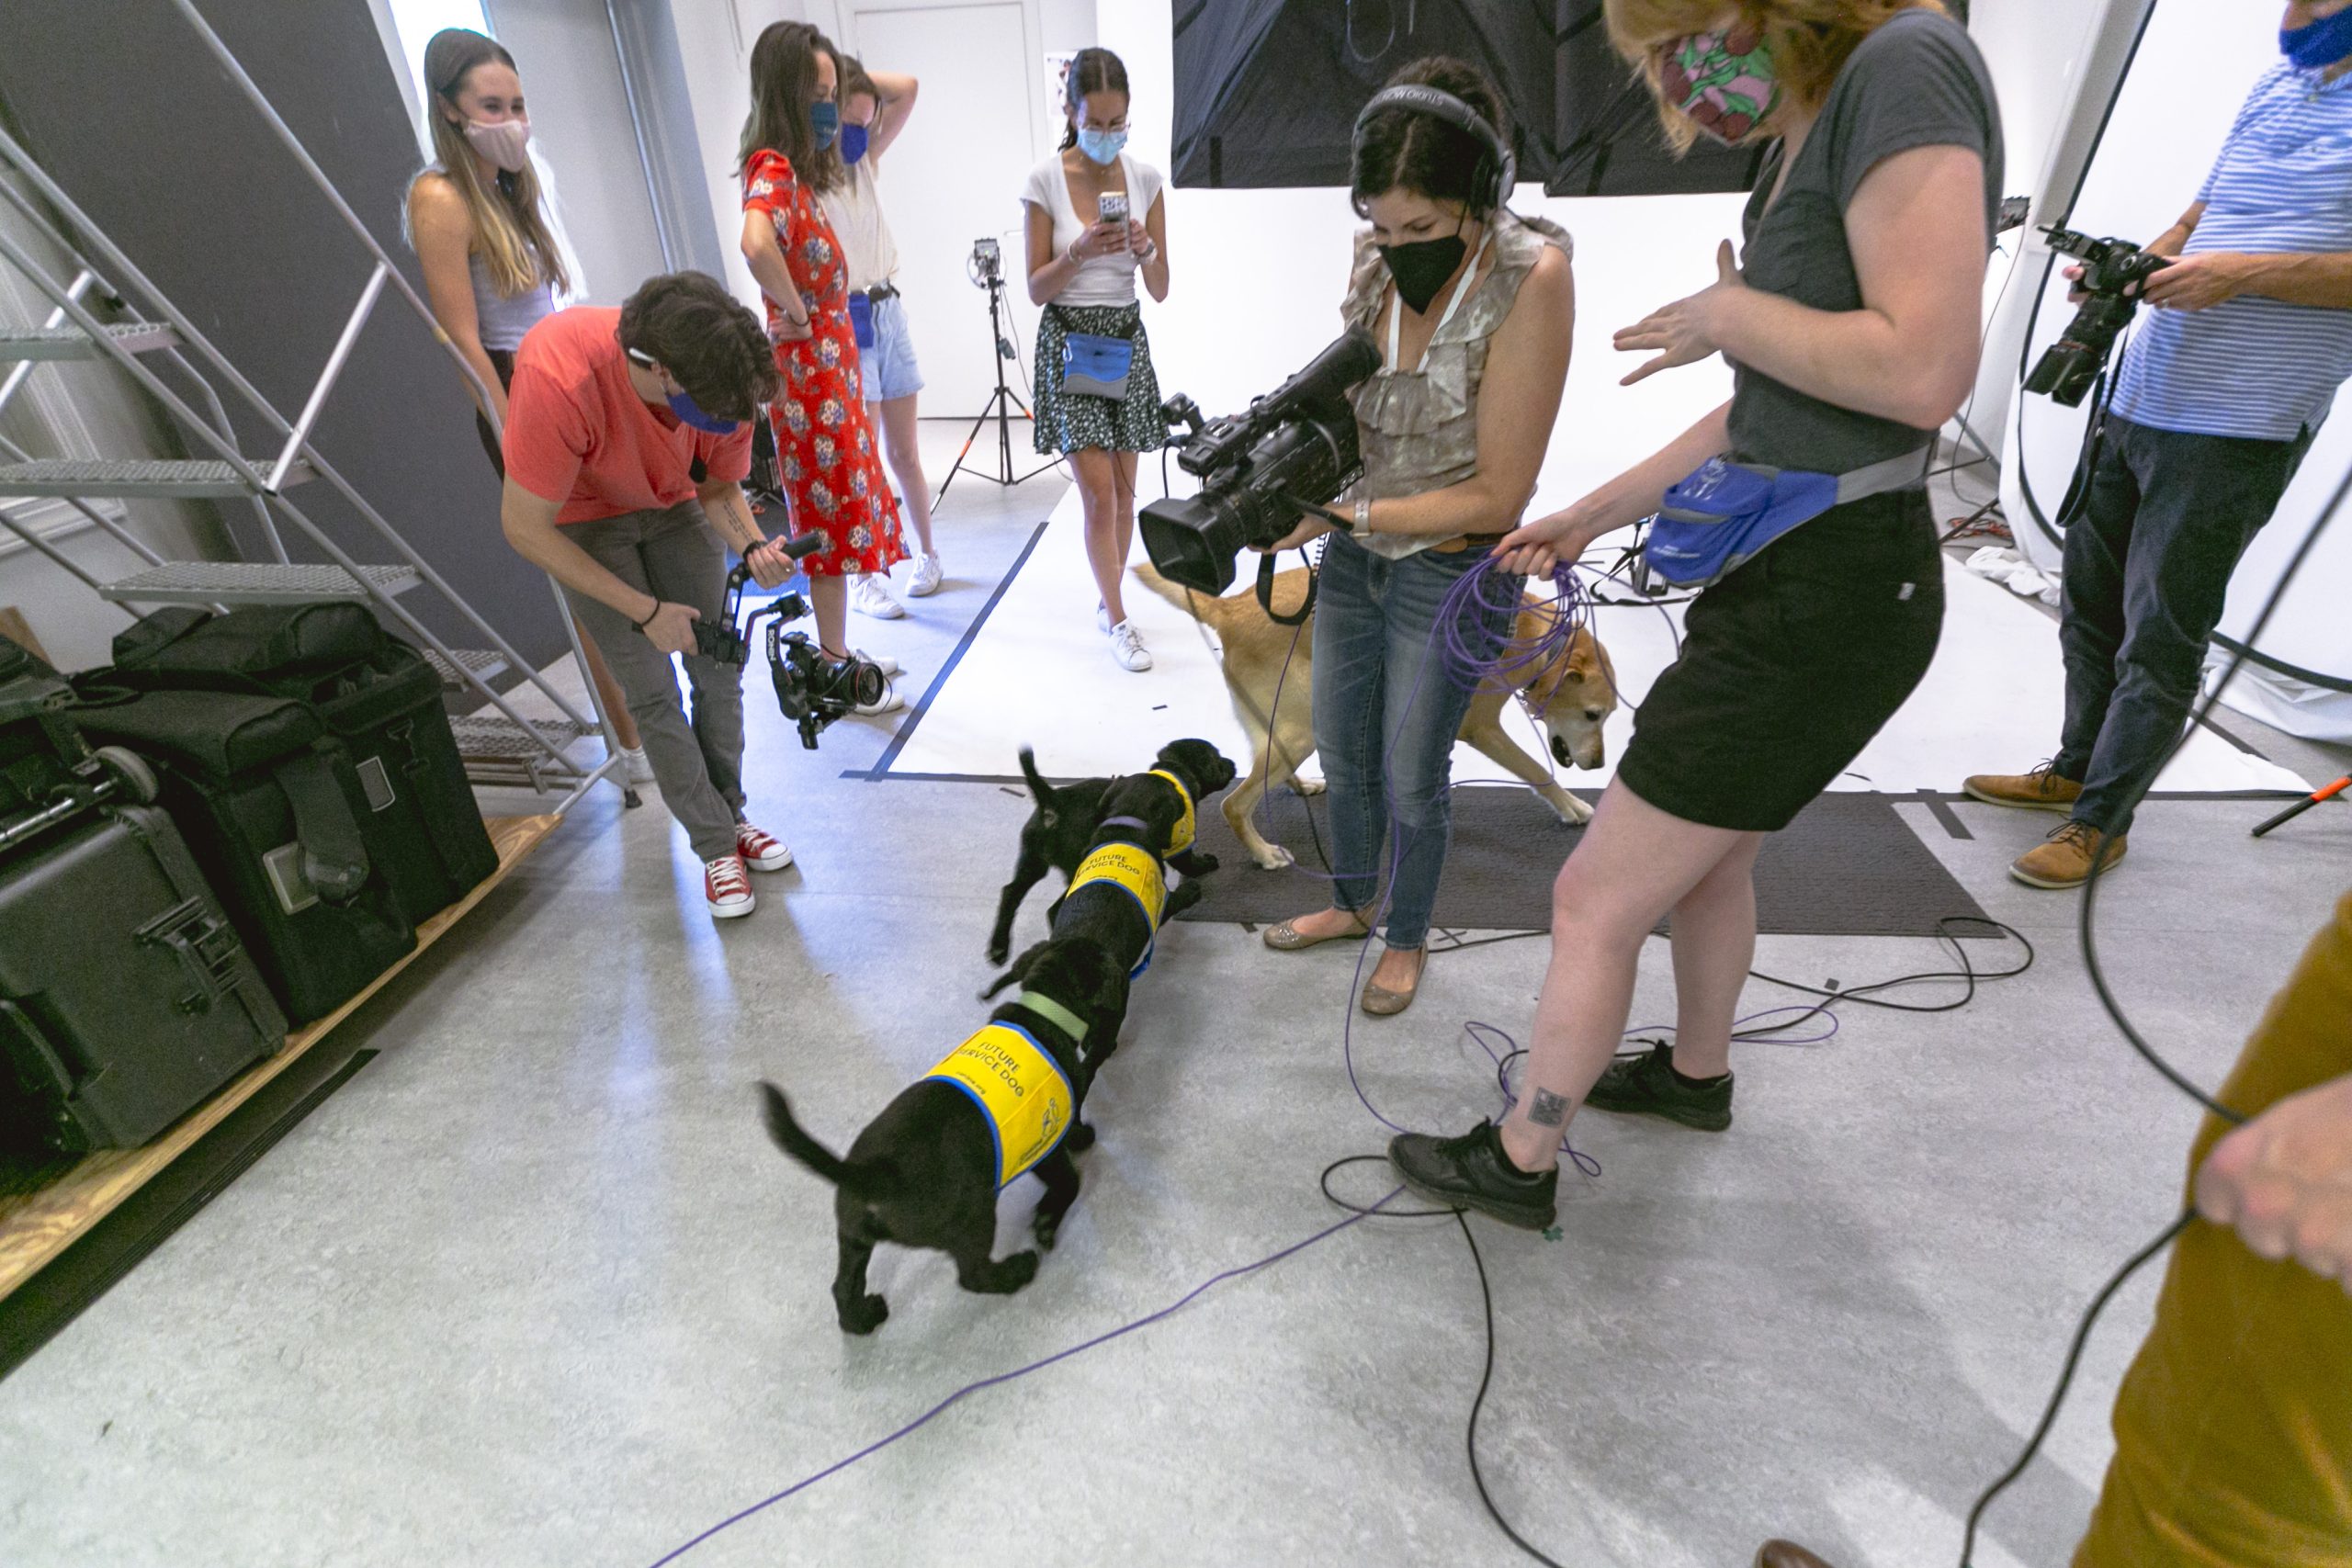 The puppies excitedly run around the studio after the class photo as intern Jacob Whatley, Julie Schoonmaker, assistant director of multimedia and production, and Emily Frachtling, digital multimedia producer, capture video of the action.